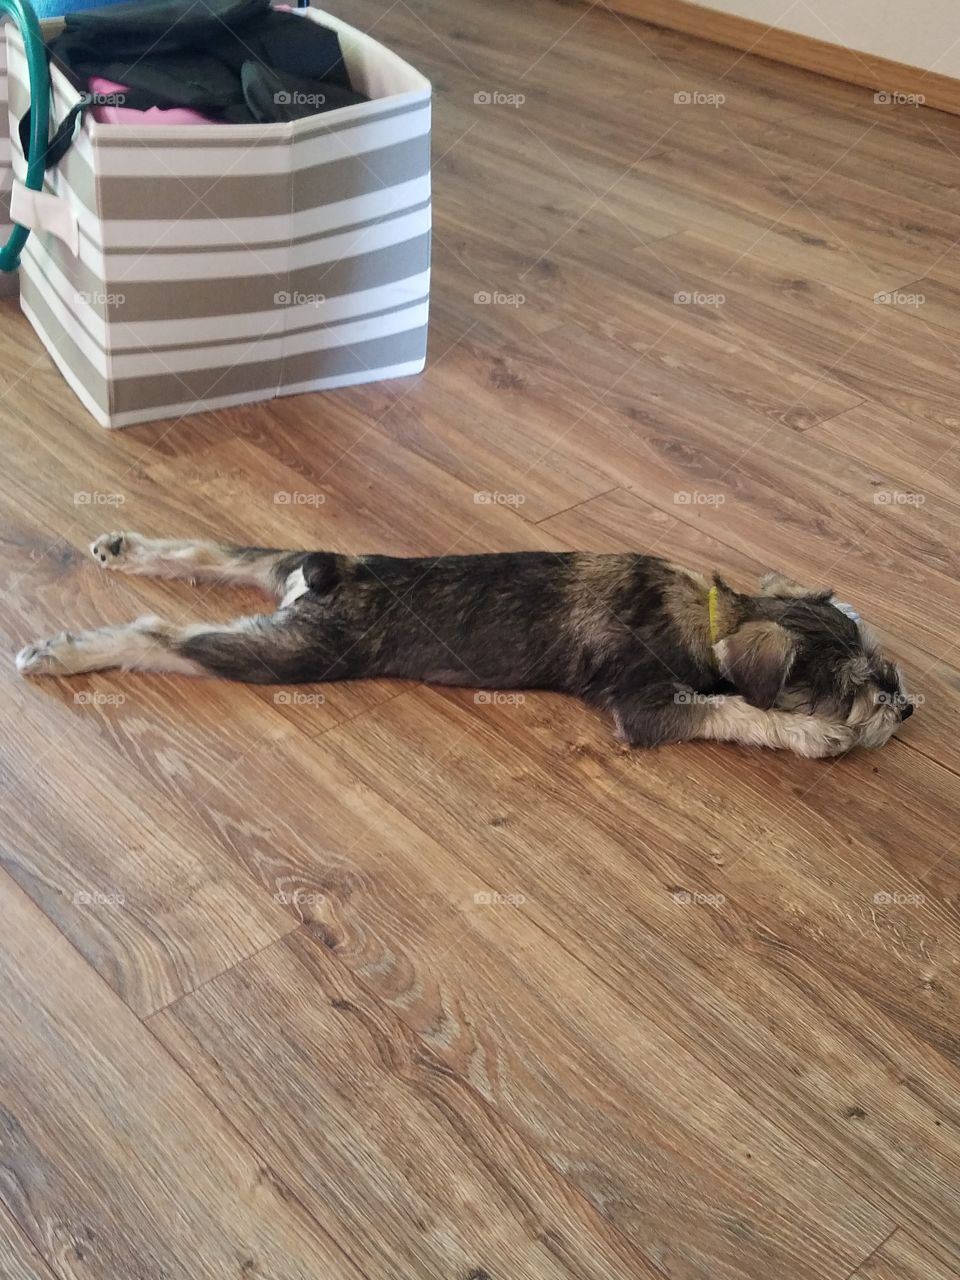 Frog dog schnauzer does a sploot